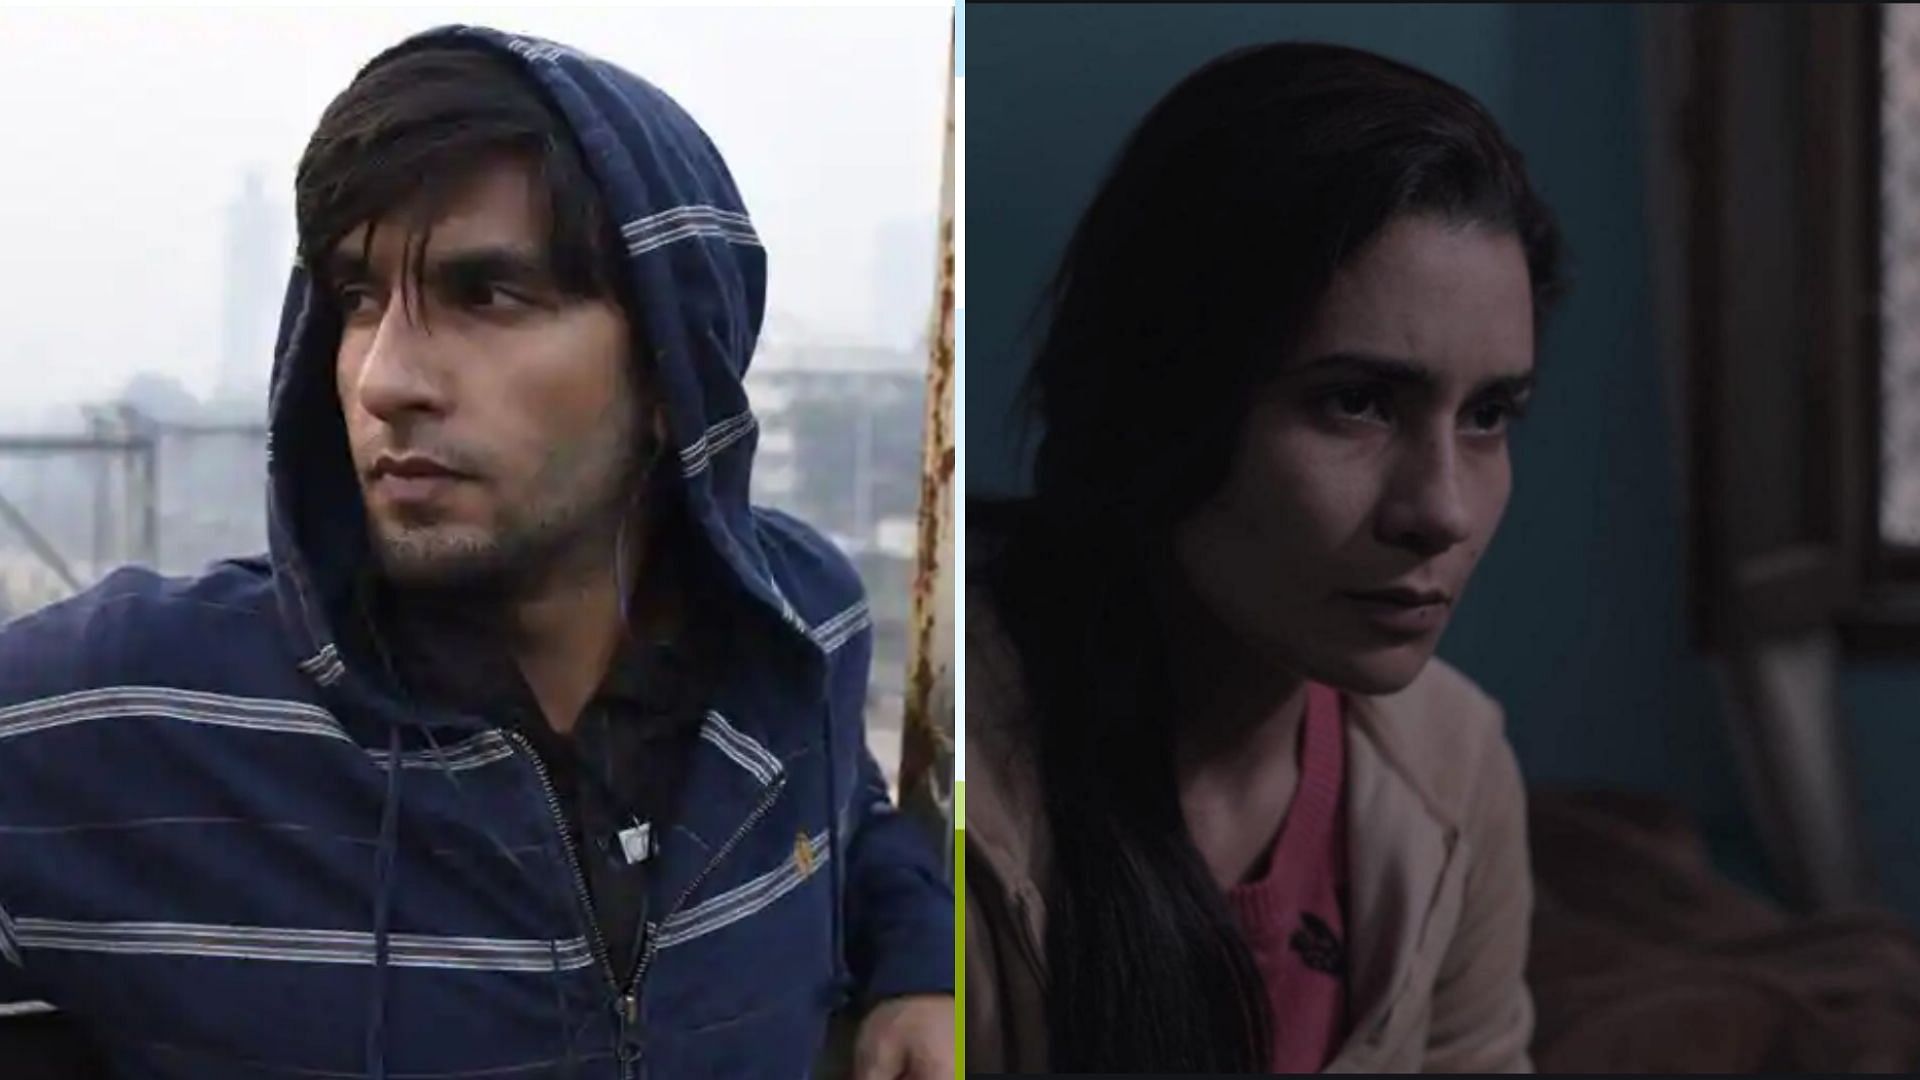 Gully Boy once again emerged as the big winner as it bagged the Best Film, Best Director and Best Actor trophies.